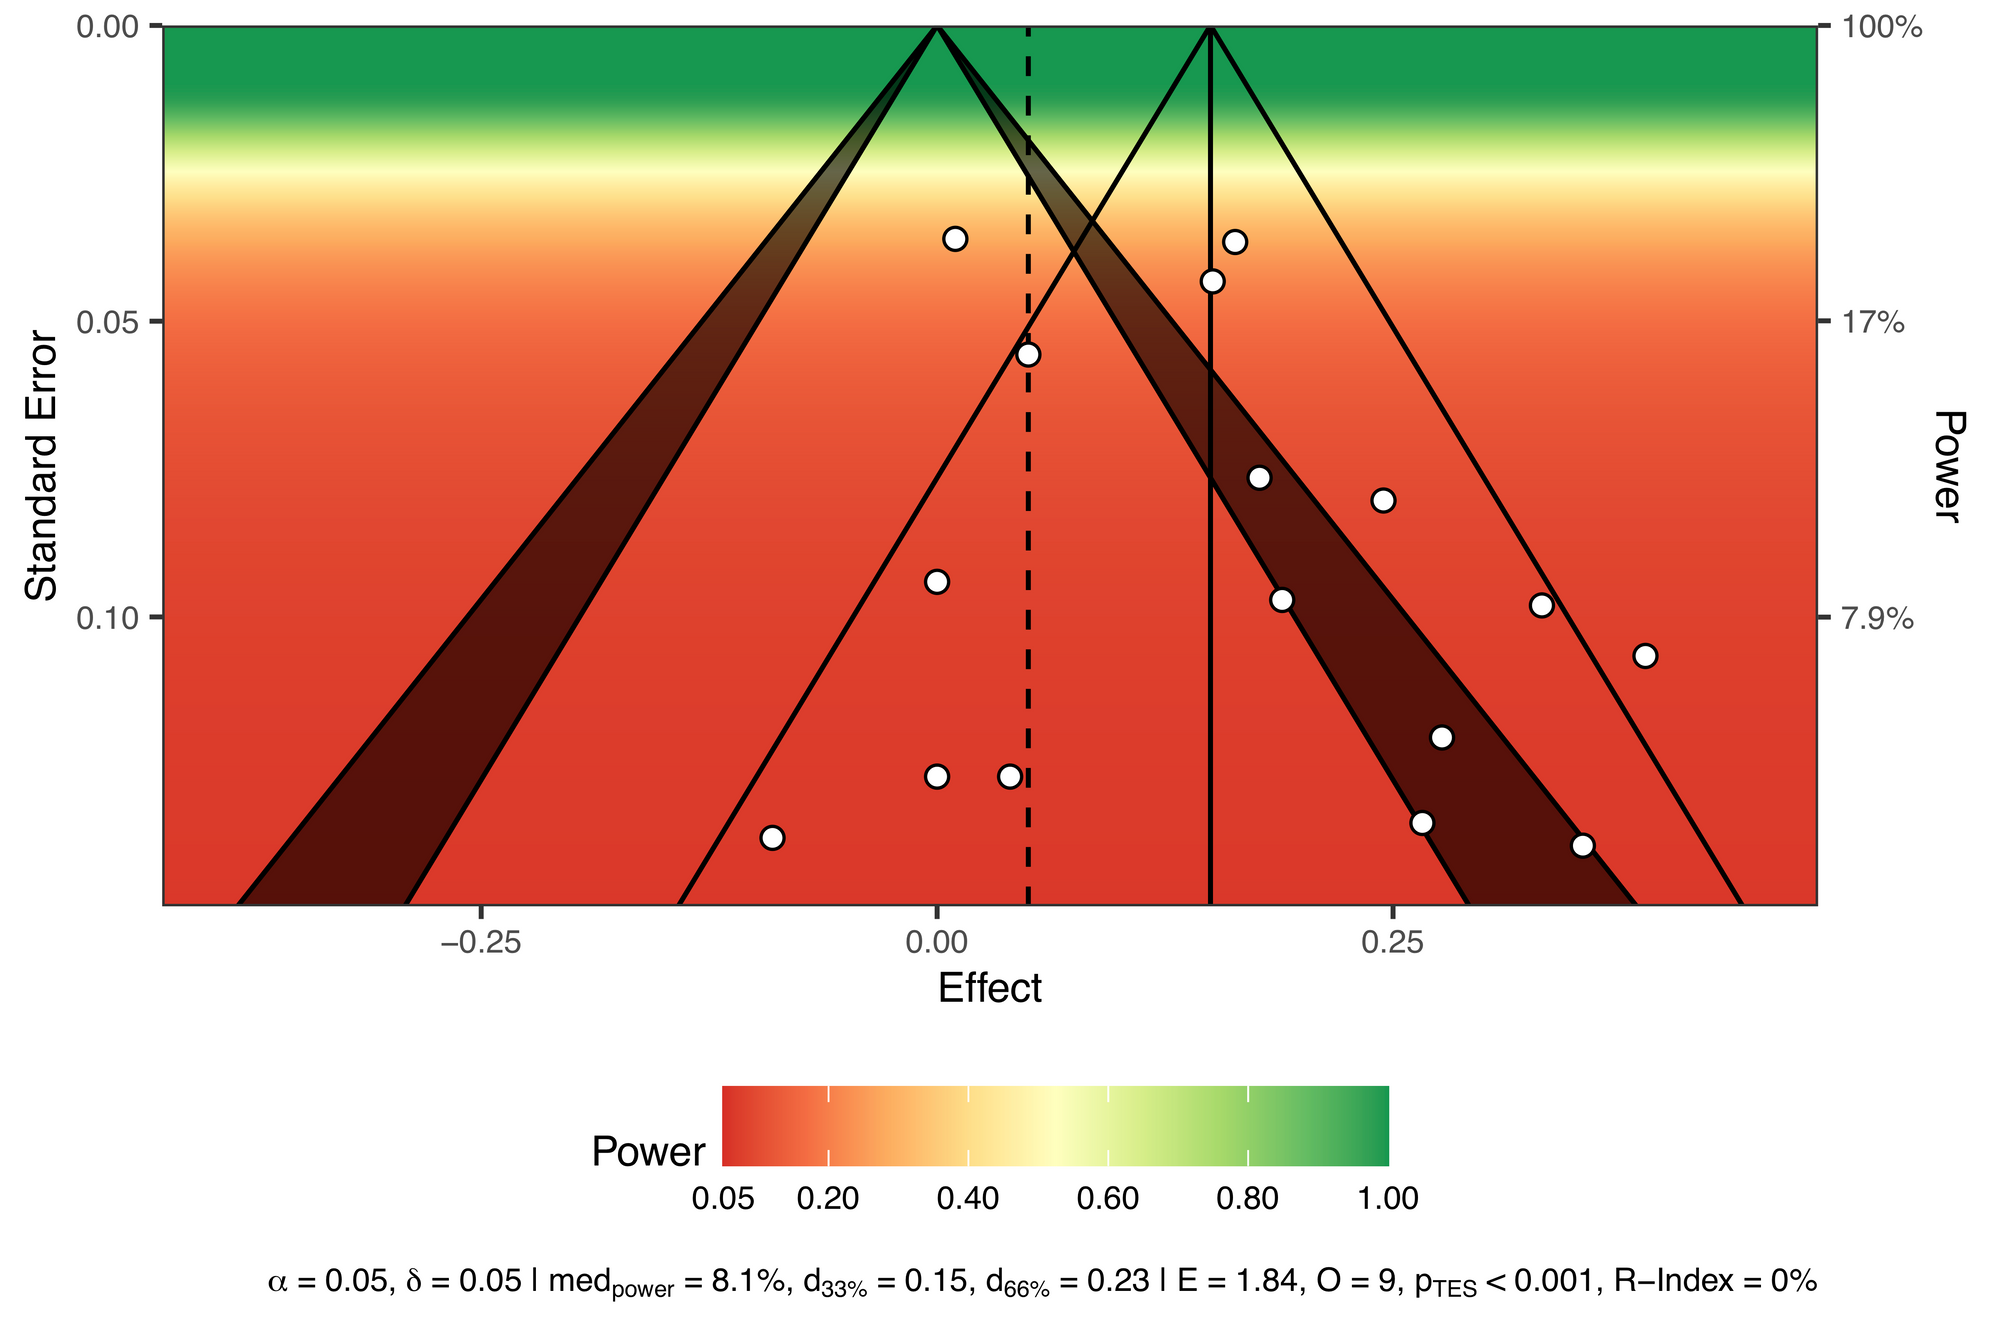 How to visualise the power of each effect in a meta-analysis